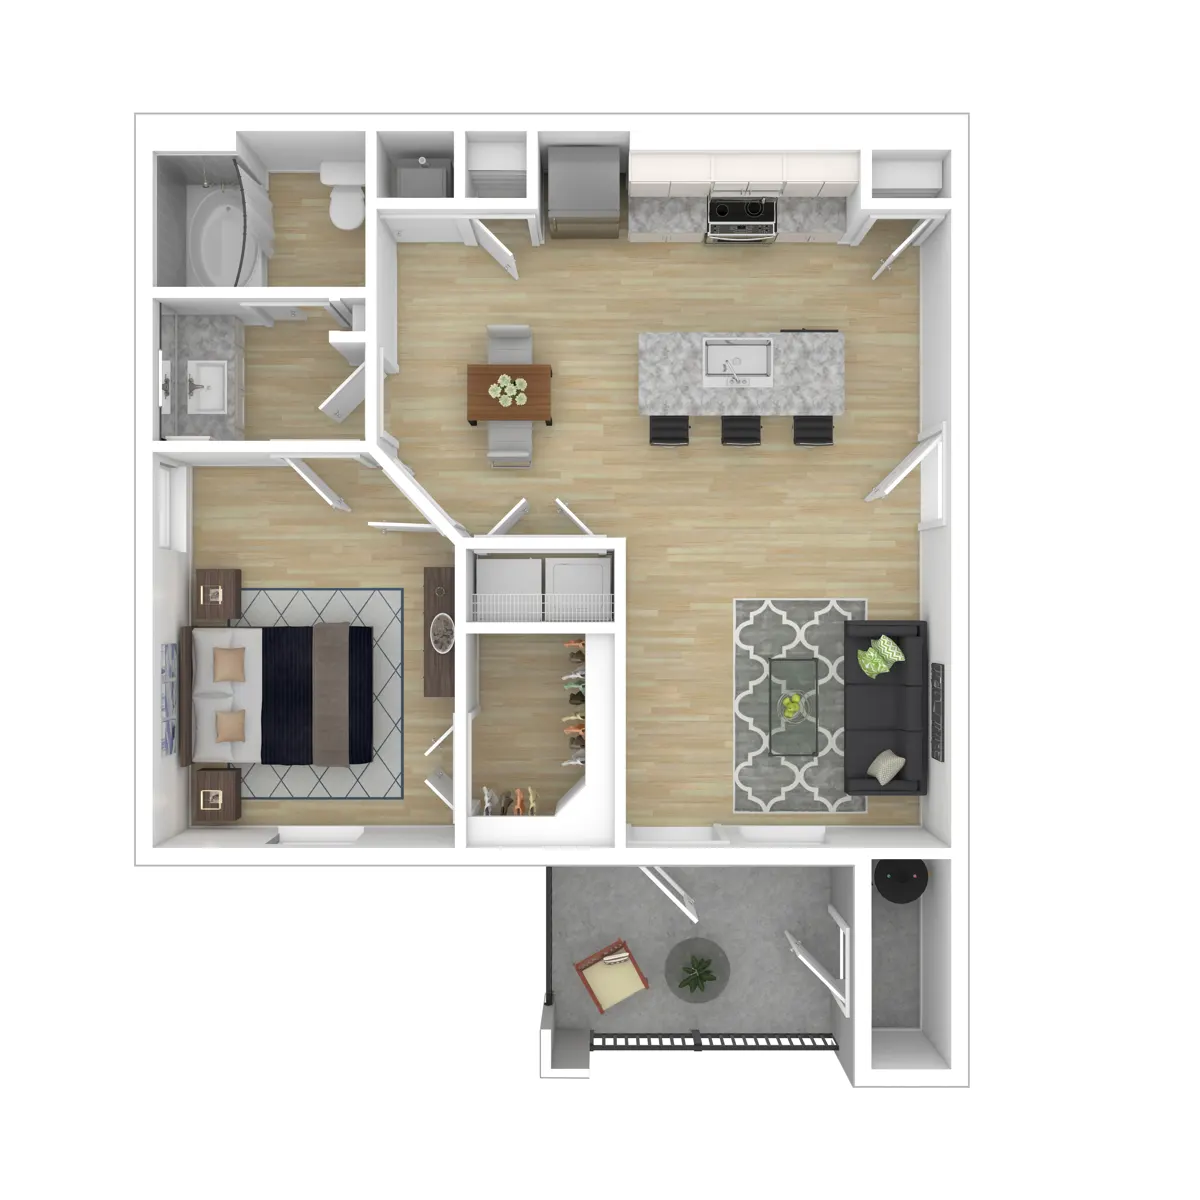 The Verge at Summer Park Rise apartments Houston Floor plan 4